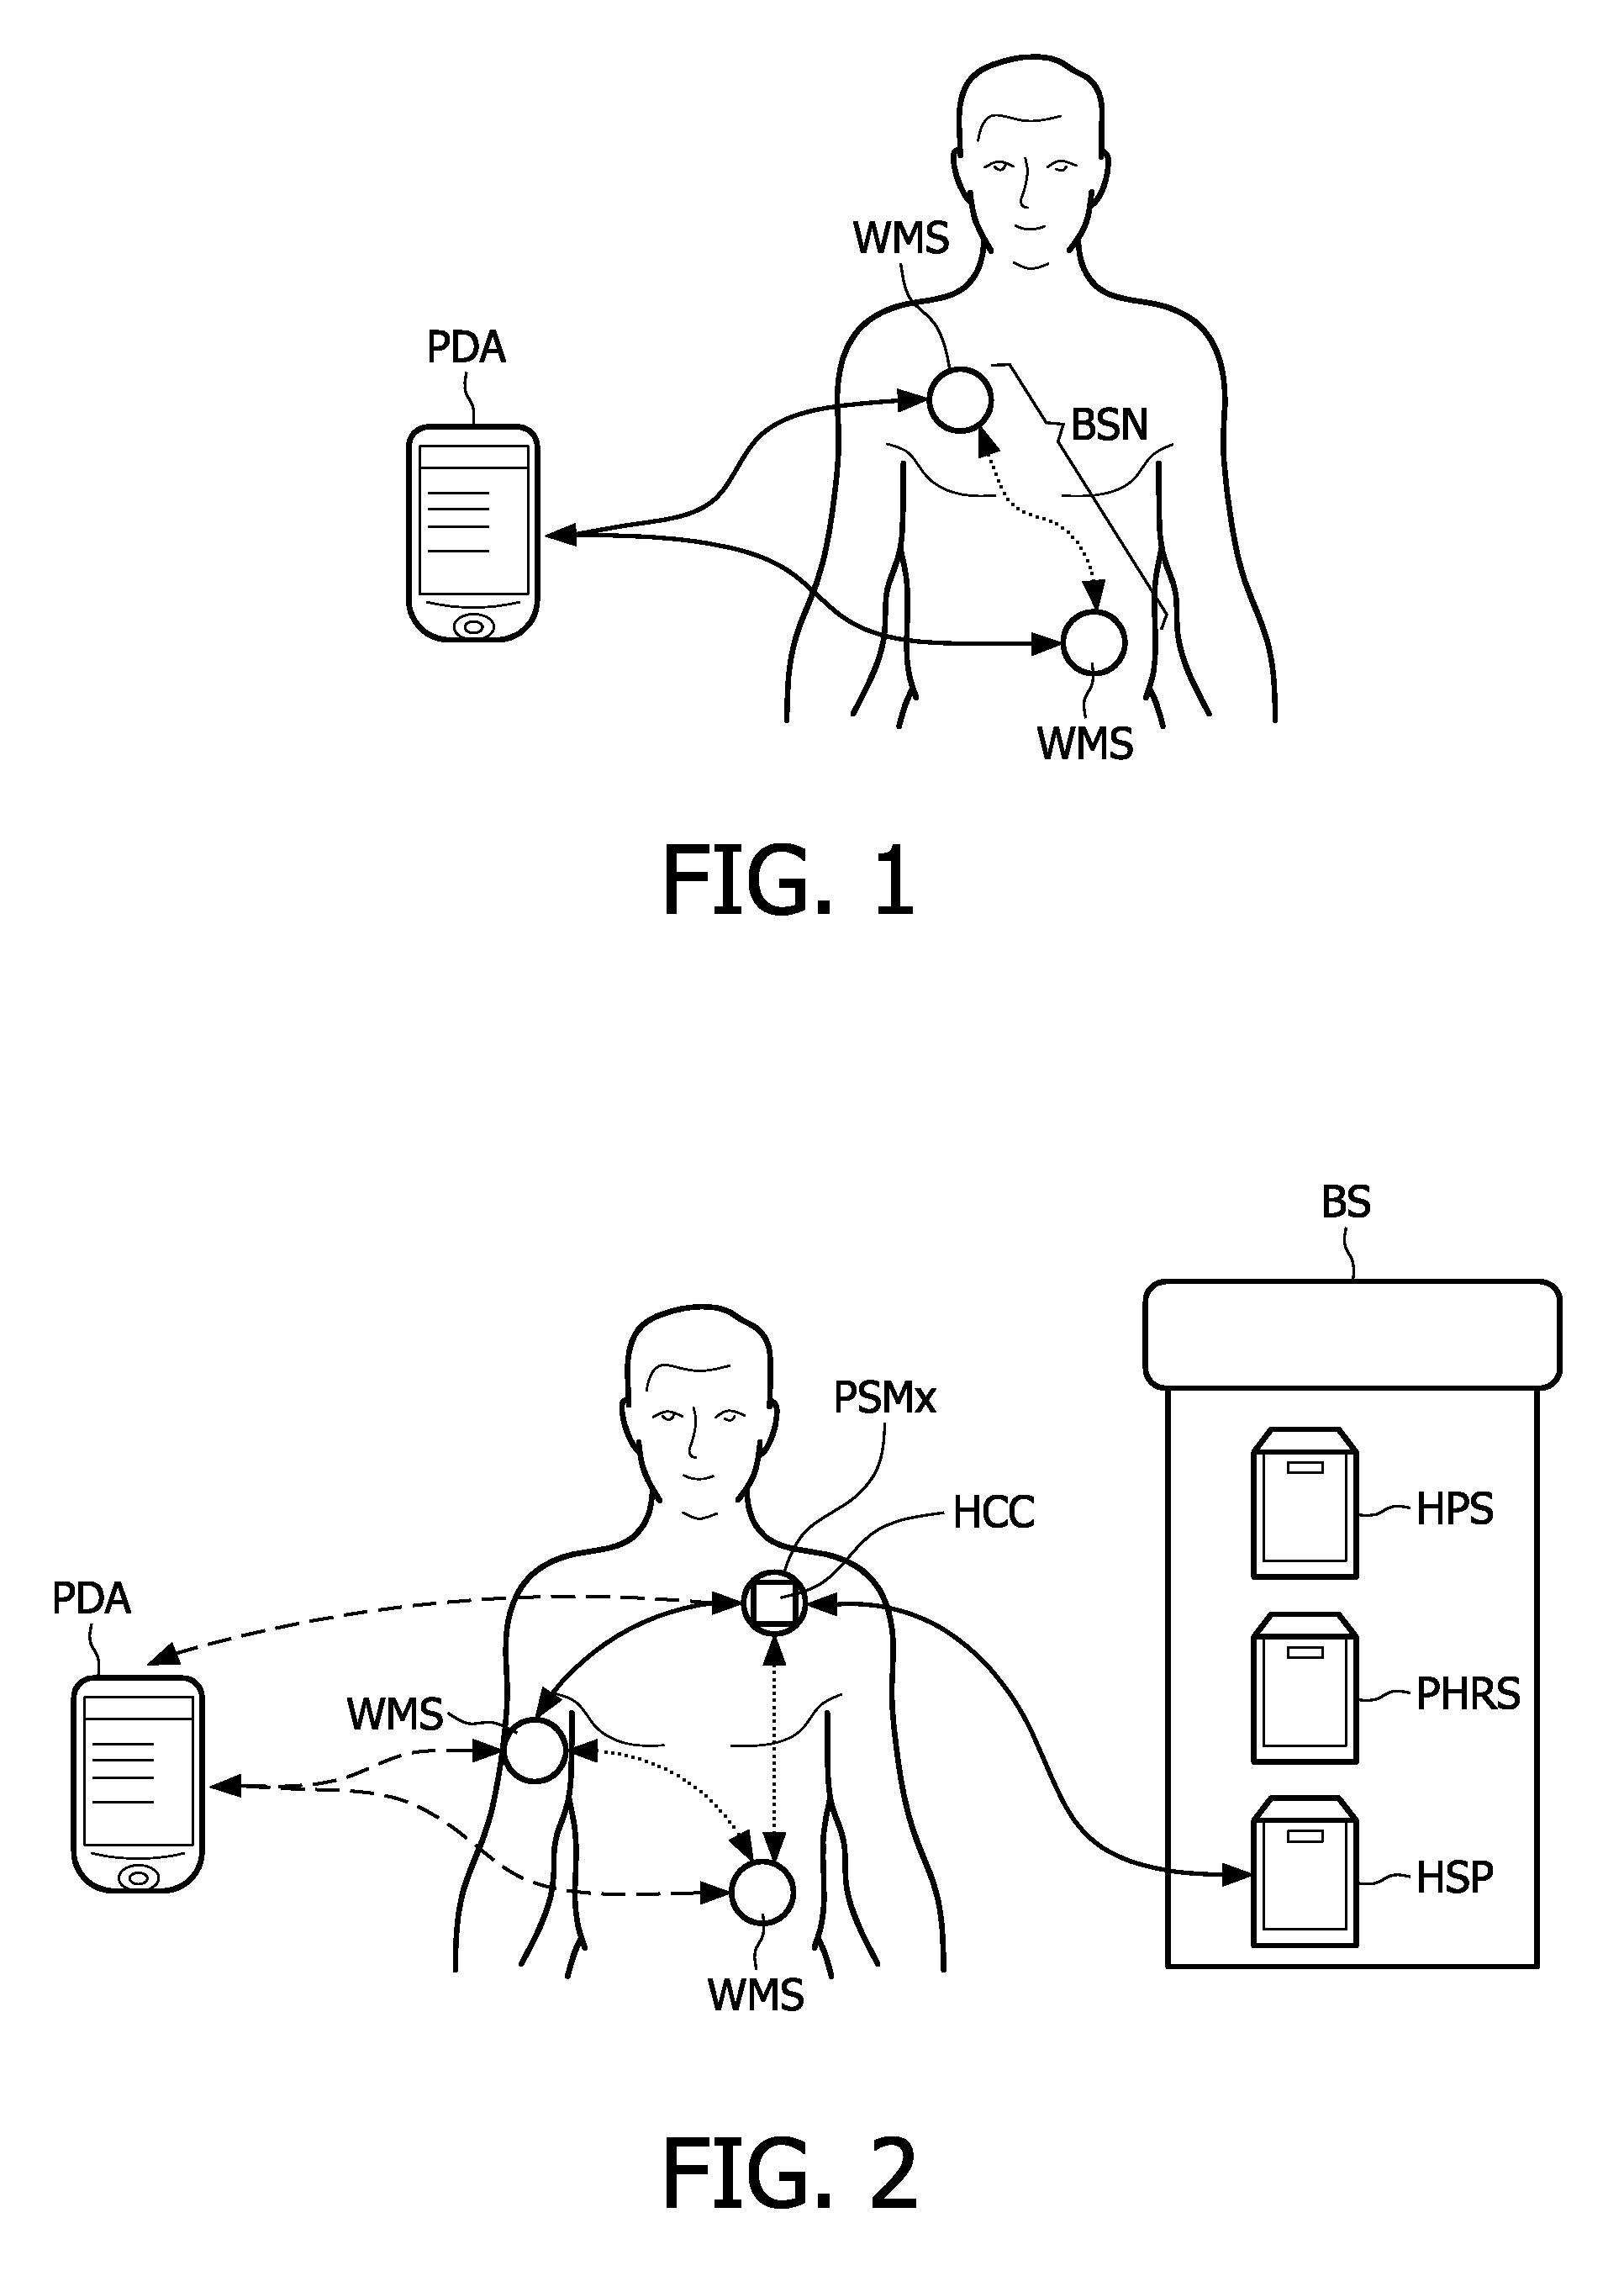 Personal security manager for ubiquitous patient monitoring